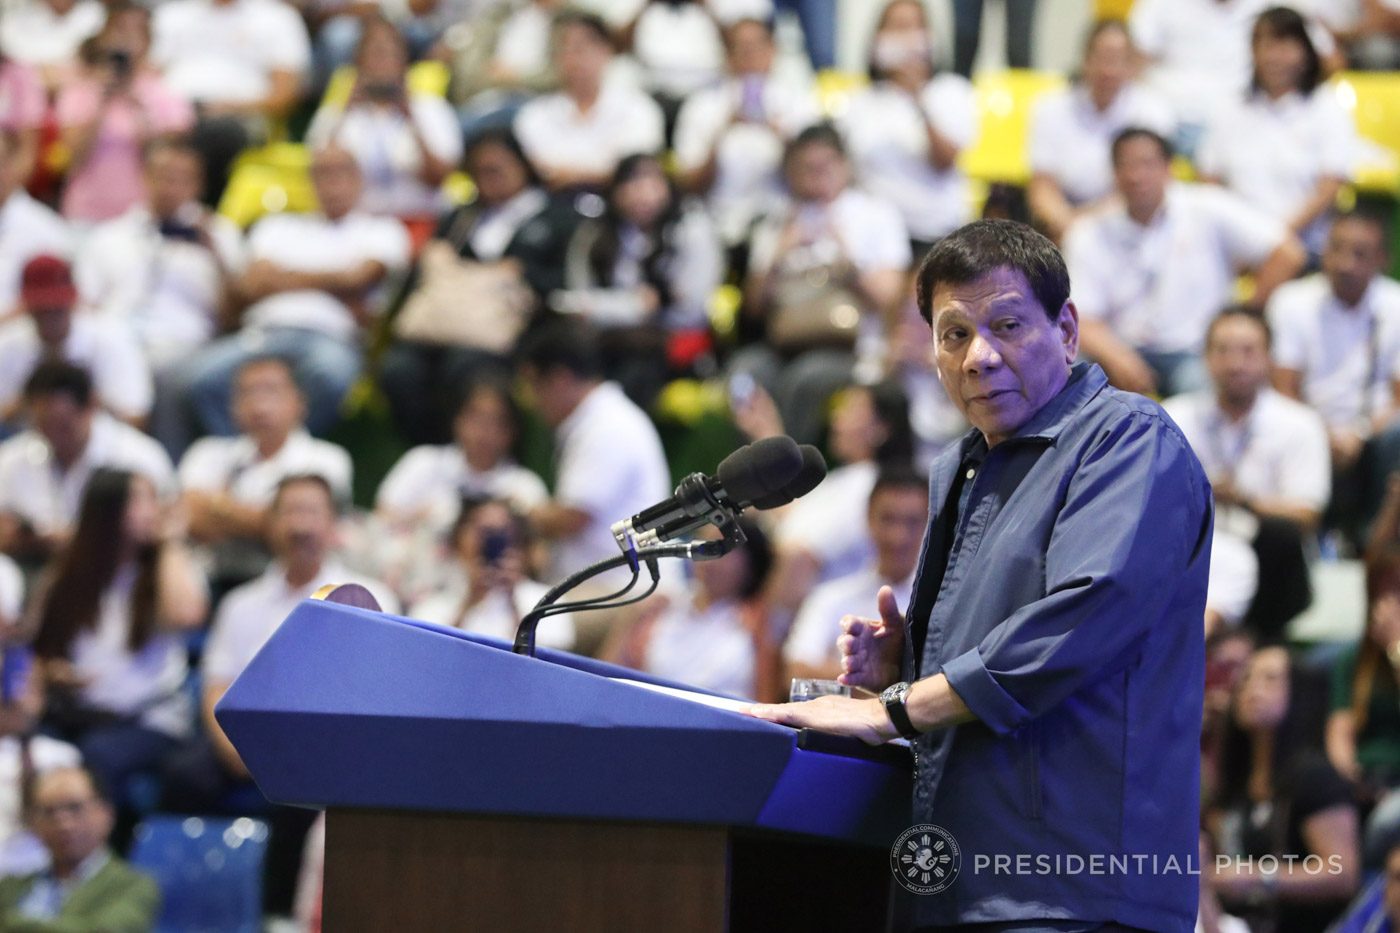 Amid OFW ID issue, Duterte reminds gov’t offices not to use his photo